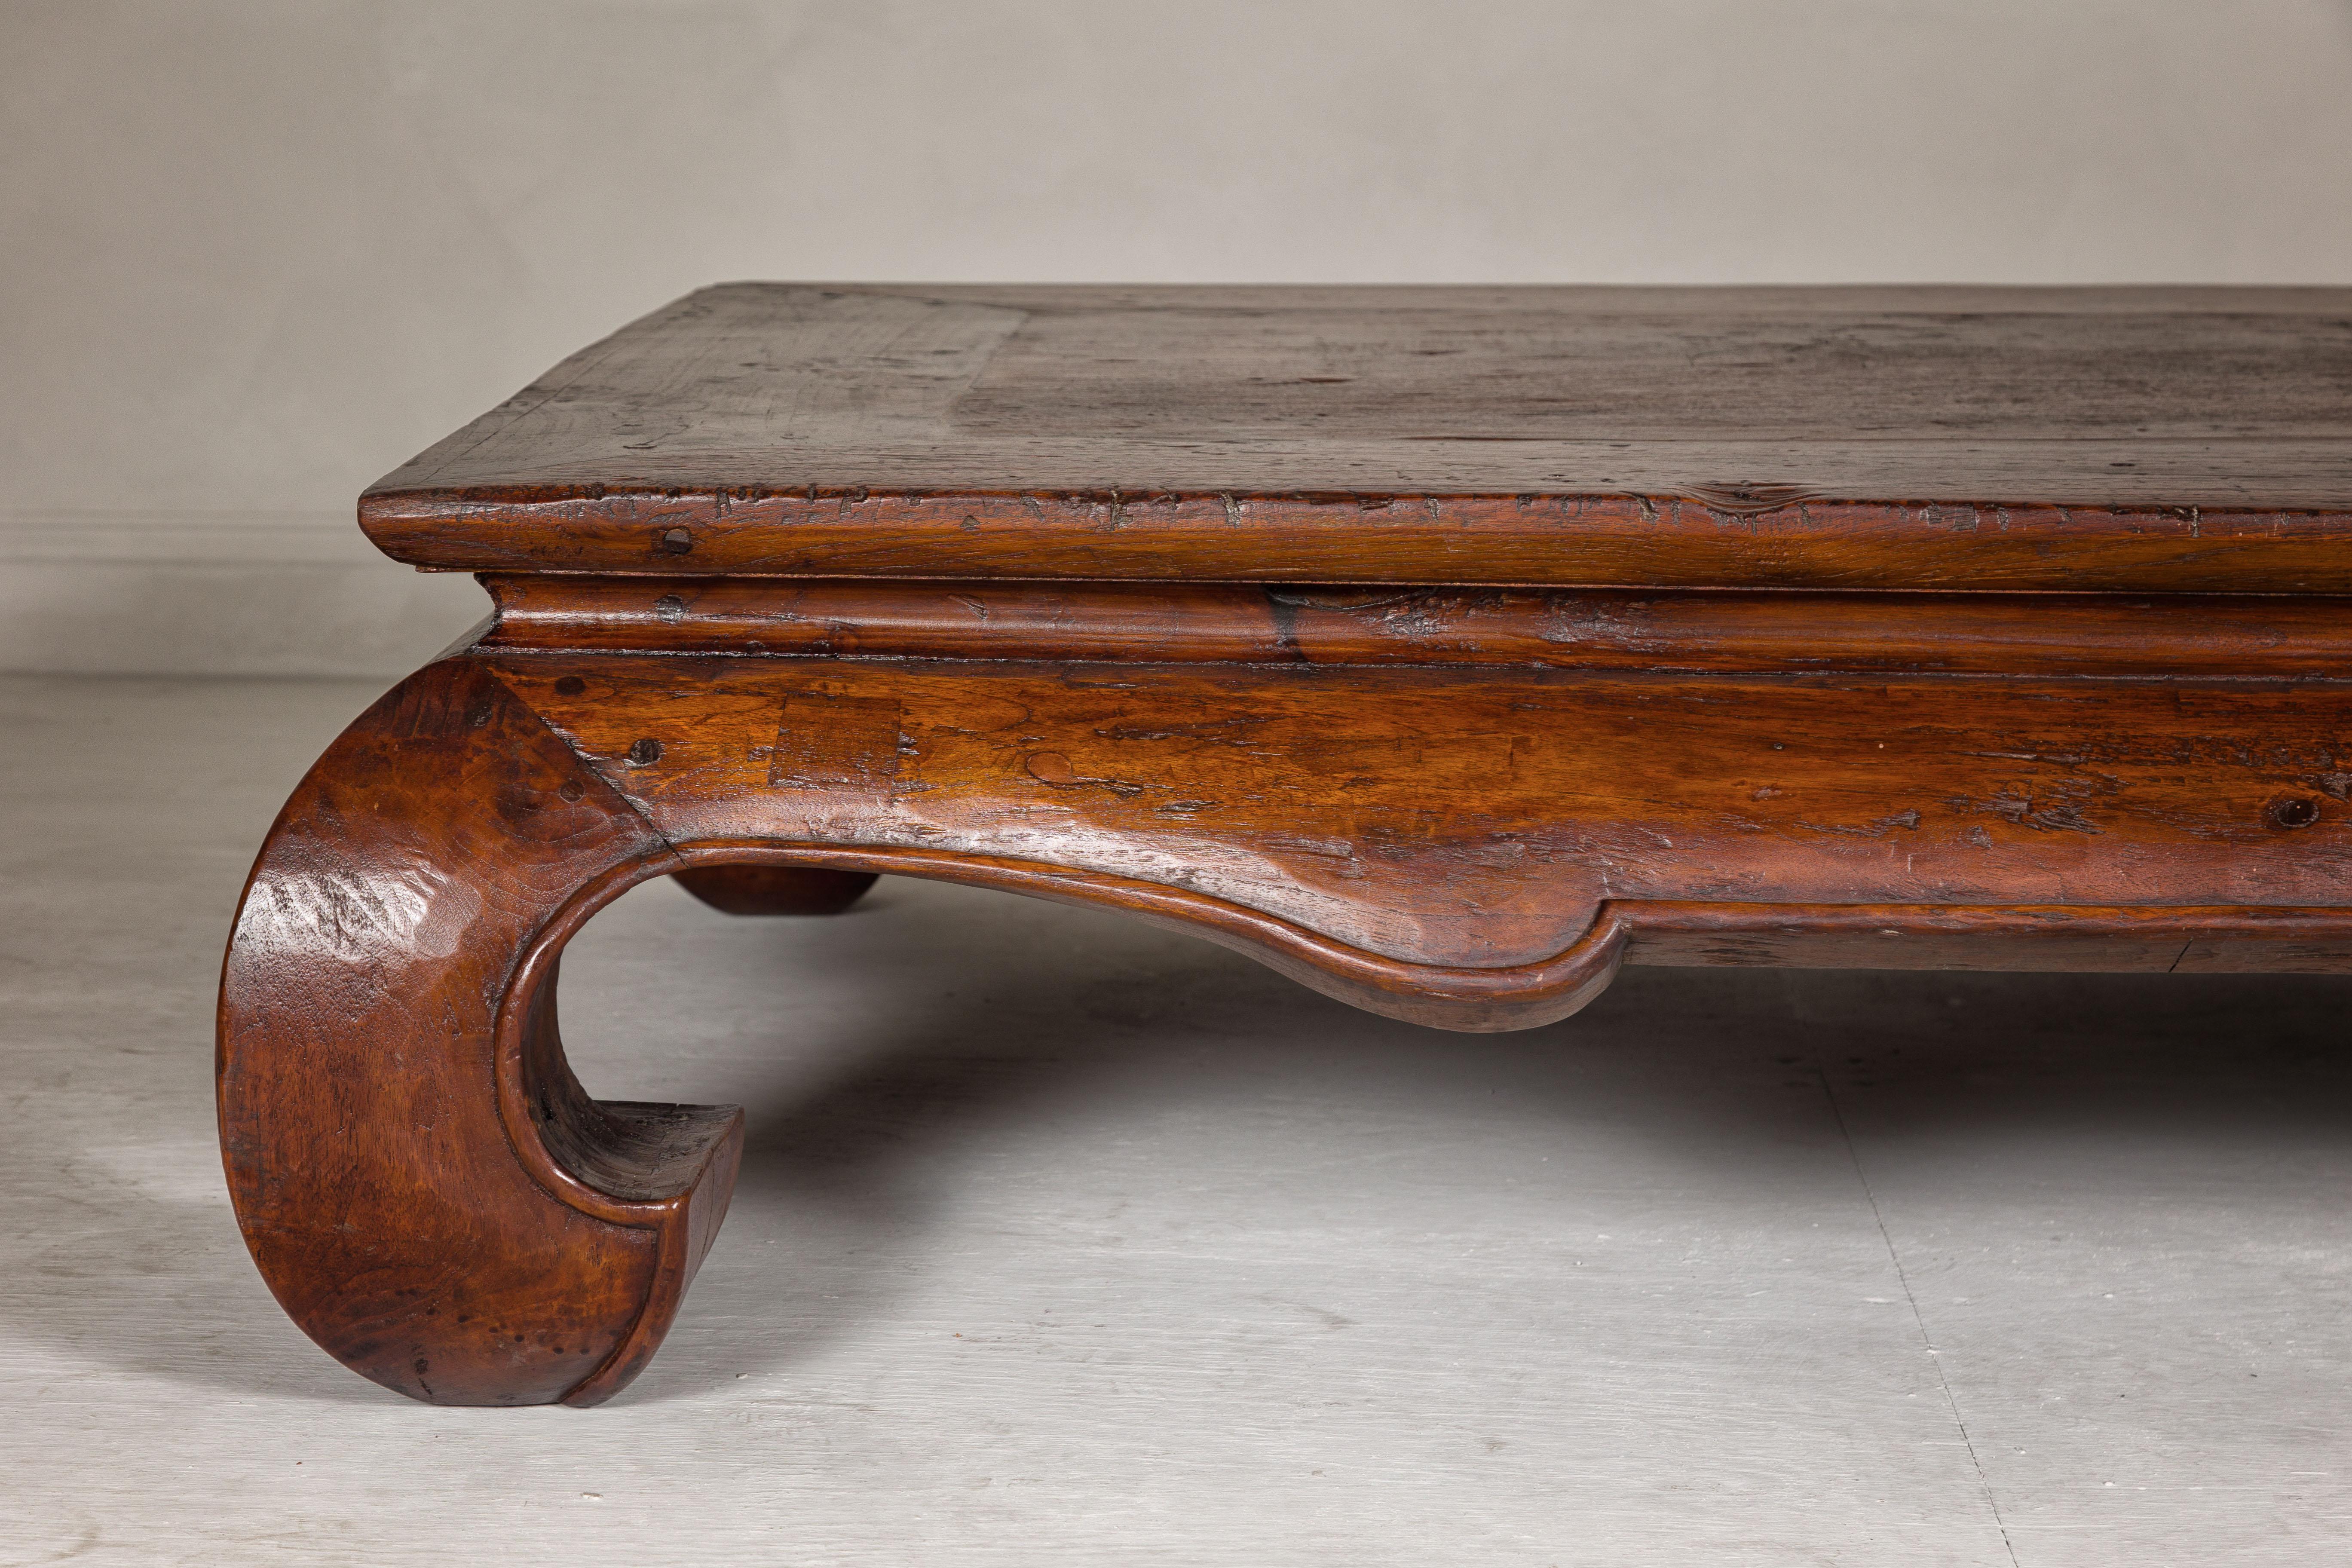 Qing Dynasty 19th Century Chow Leg Kang Table with Weathered Rustic Patina For Sale 1